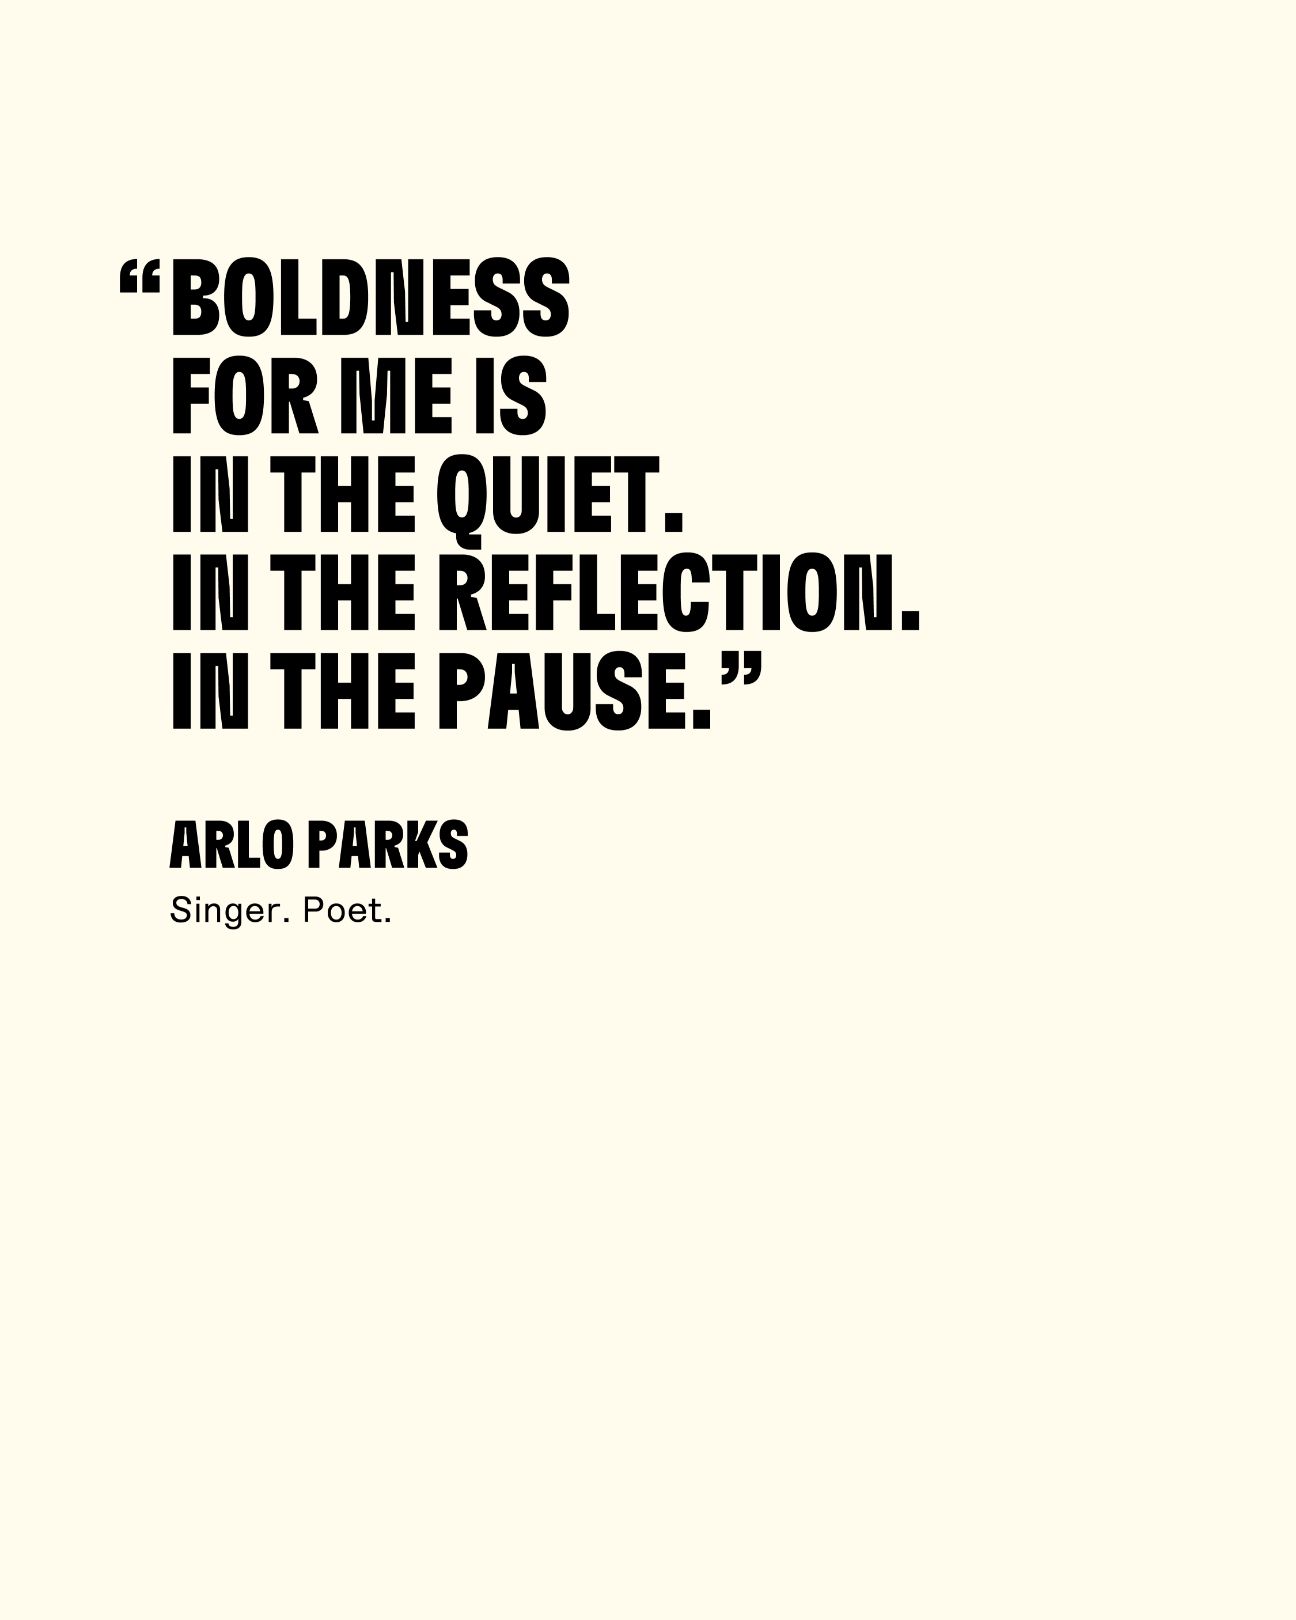 Boldness for me is in the quiet. In the reflection. In the pause. -Arlo Parks Singer, Poet